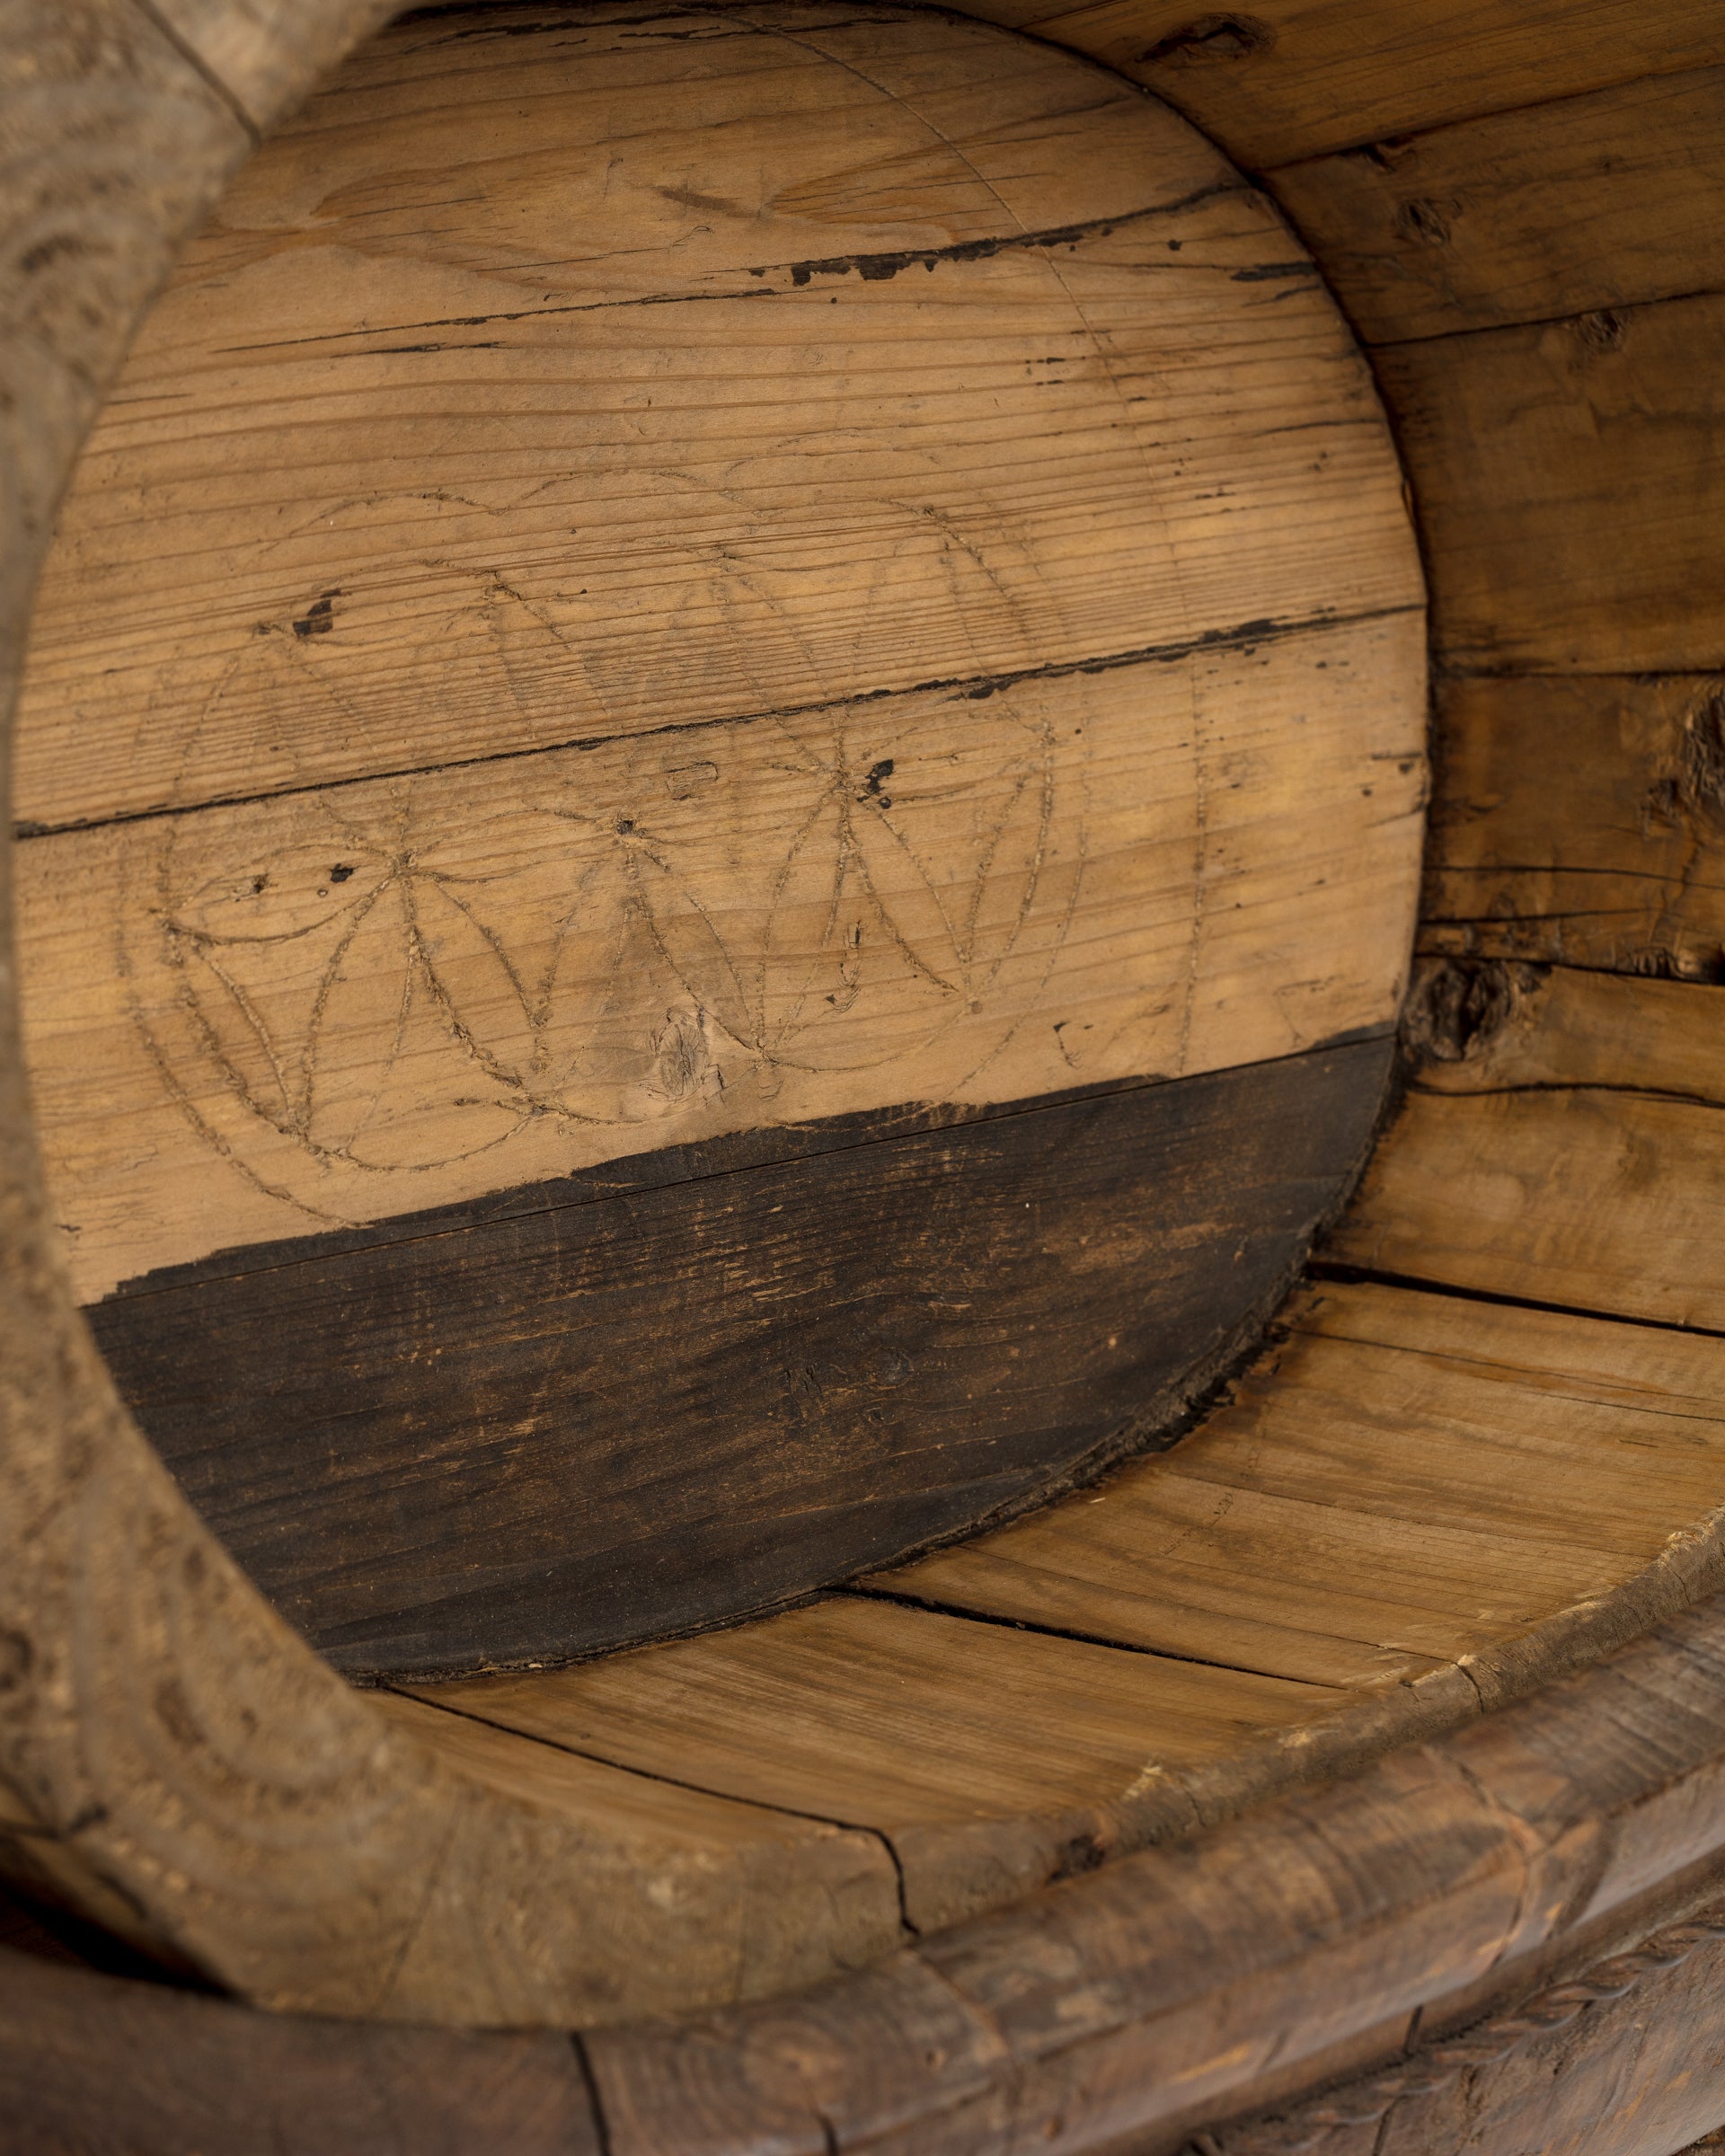 Close-up view of an Oval Wood Bucket 10 end in Scottsdale, Arizona, with hand-carved patterns, showing concentric circles and scratch marks on textured wood by Indus Design Imports.